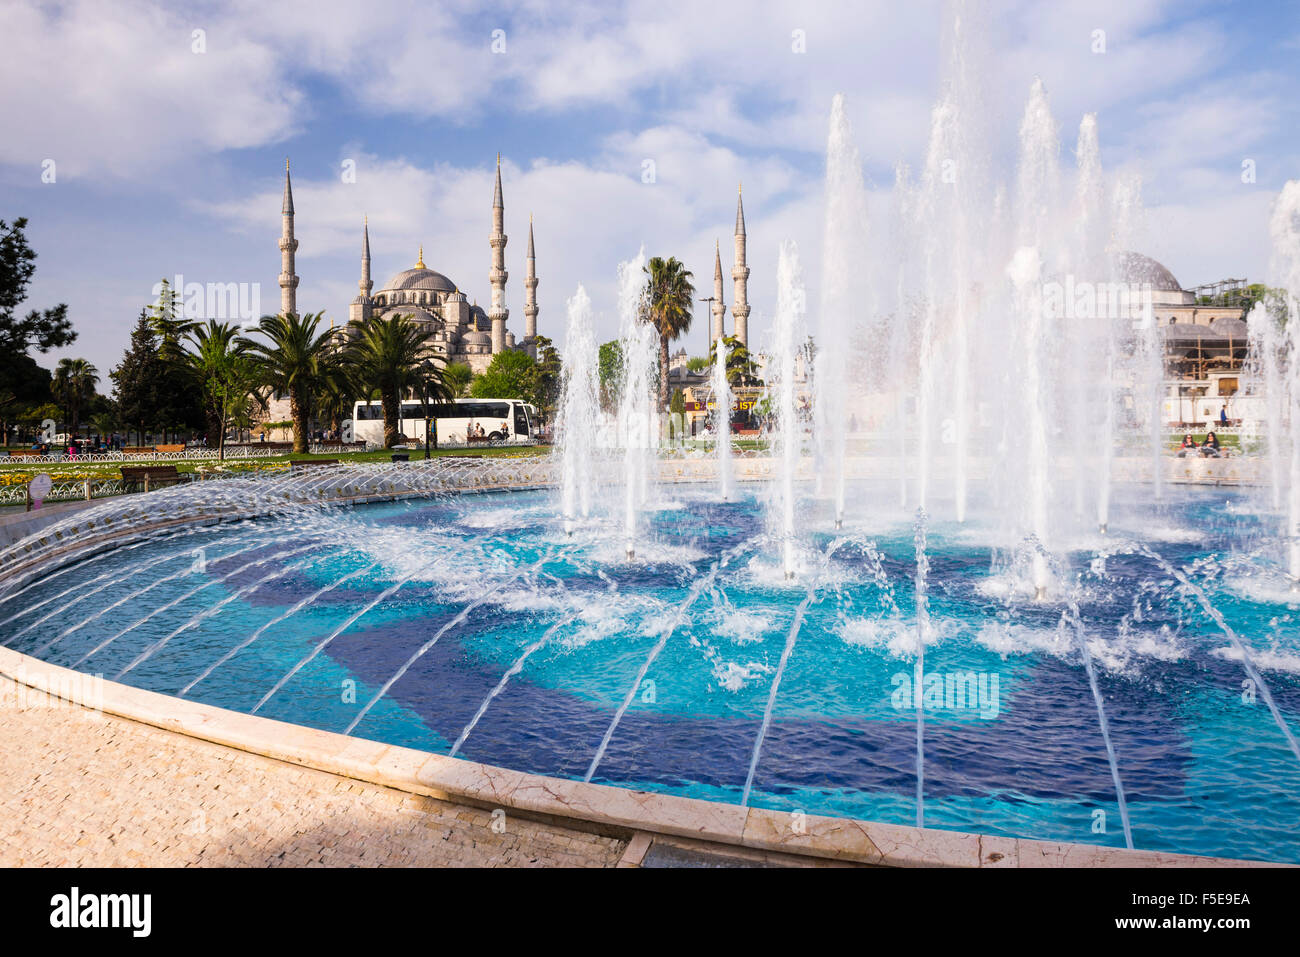 Blue Mosque (Sultan Ahmed Mosque) (Sultan Ahmet Camii) and fountain in Sultanahmet Park, Istanbul, Turkey, Europe Stock Photo